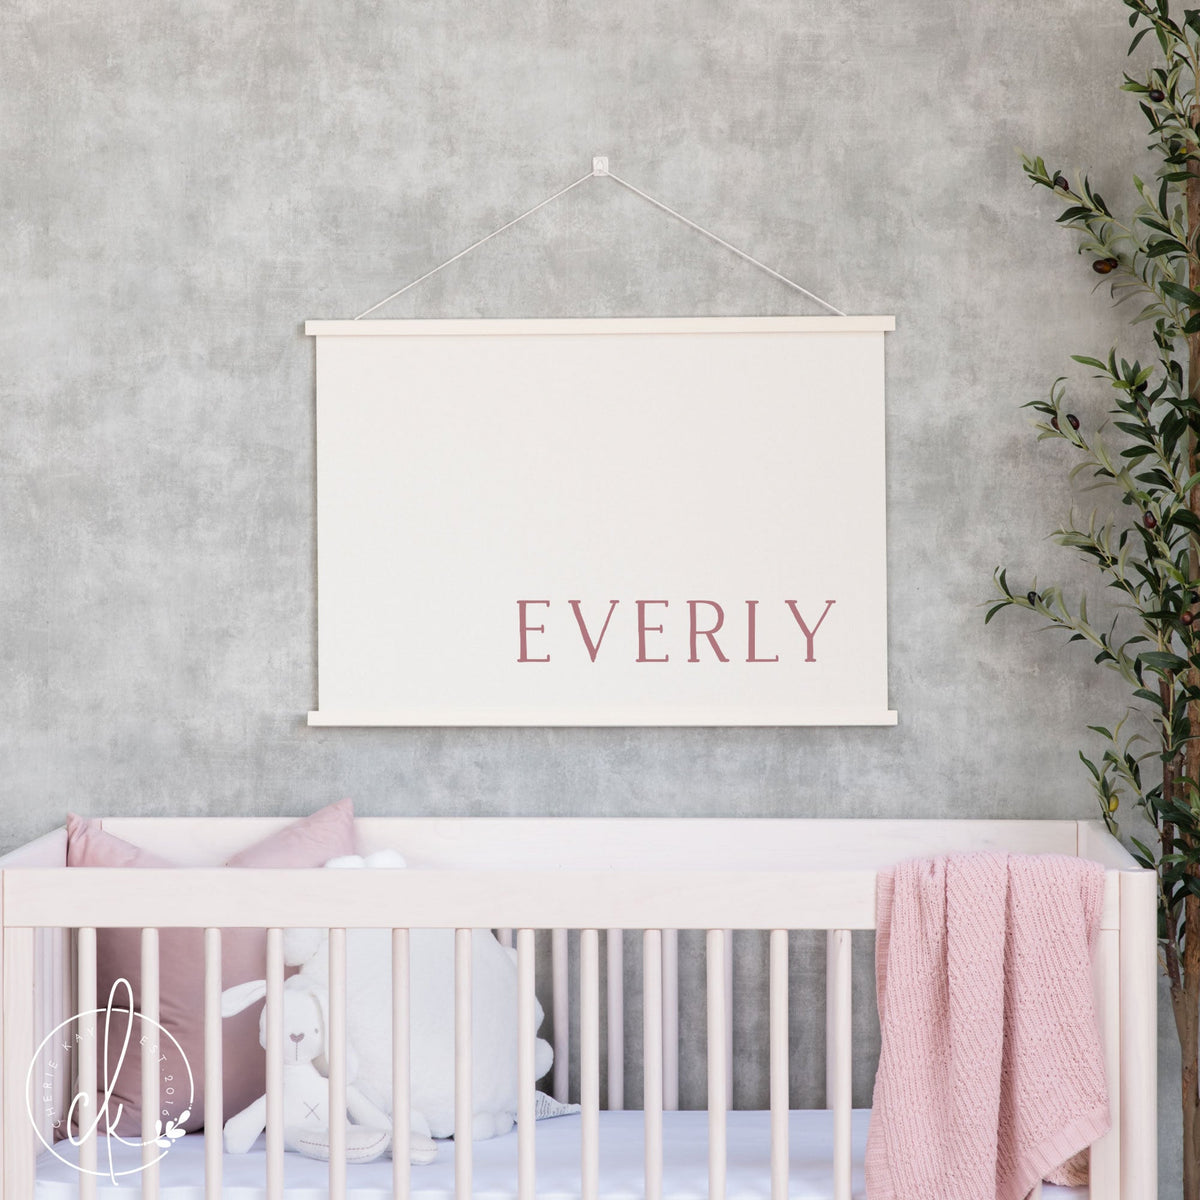 Personalized Baby Name | Fabric Wall Hanging | Personalized Baby Gift | New Baby Gift | Nursery Wall Decor | Everly